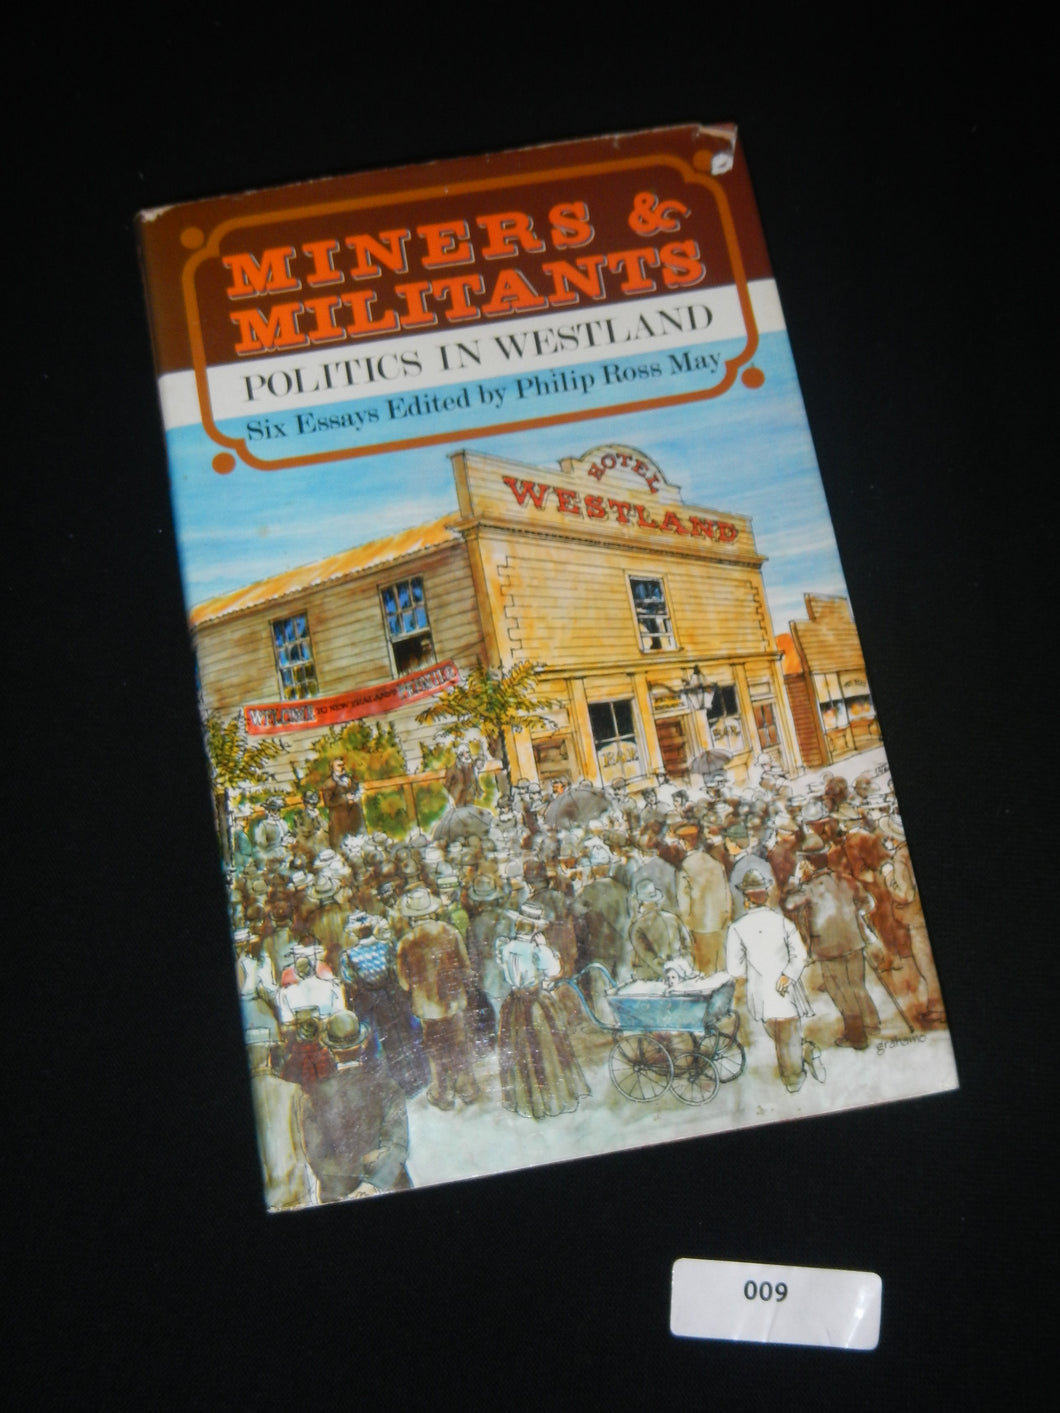 009 Miners and Militants by Philip Ross May